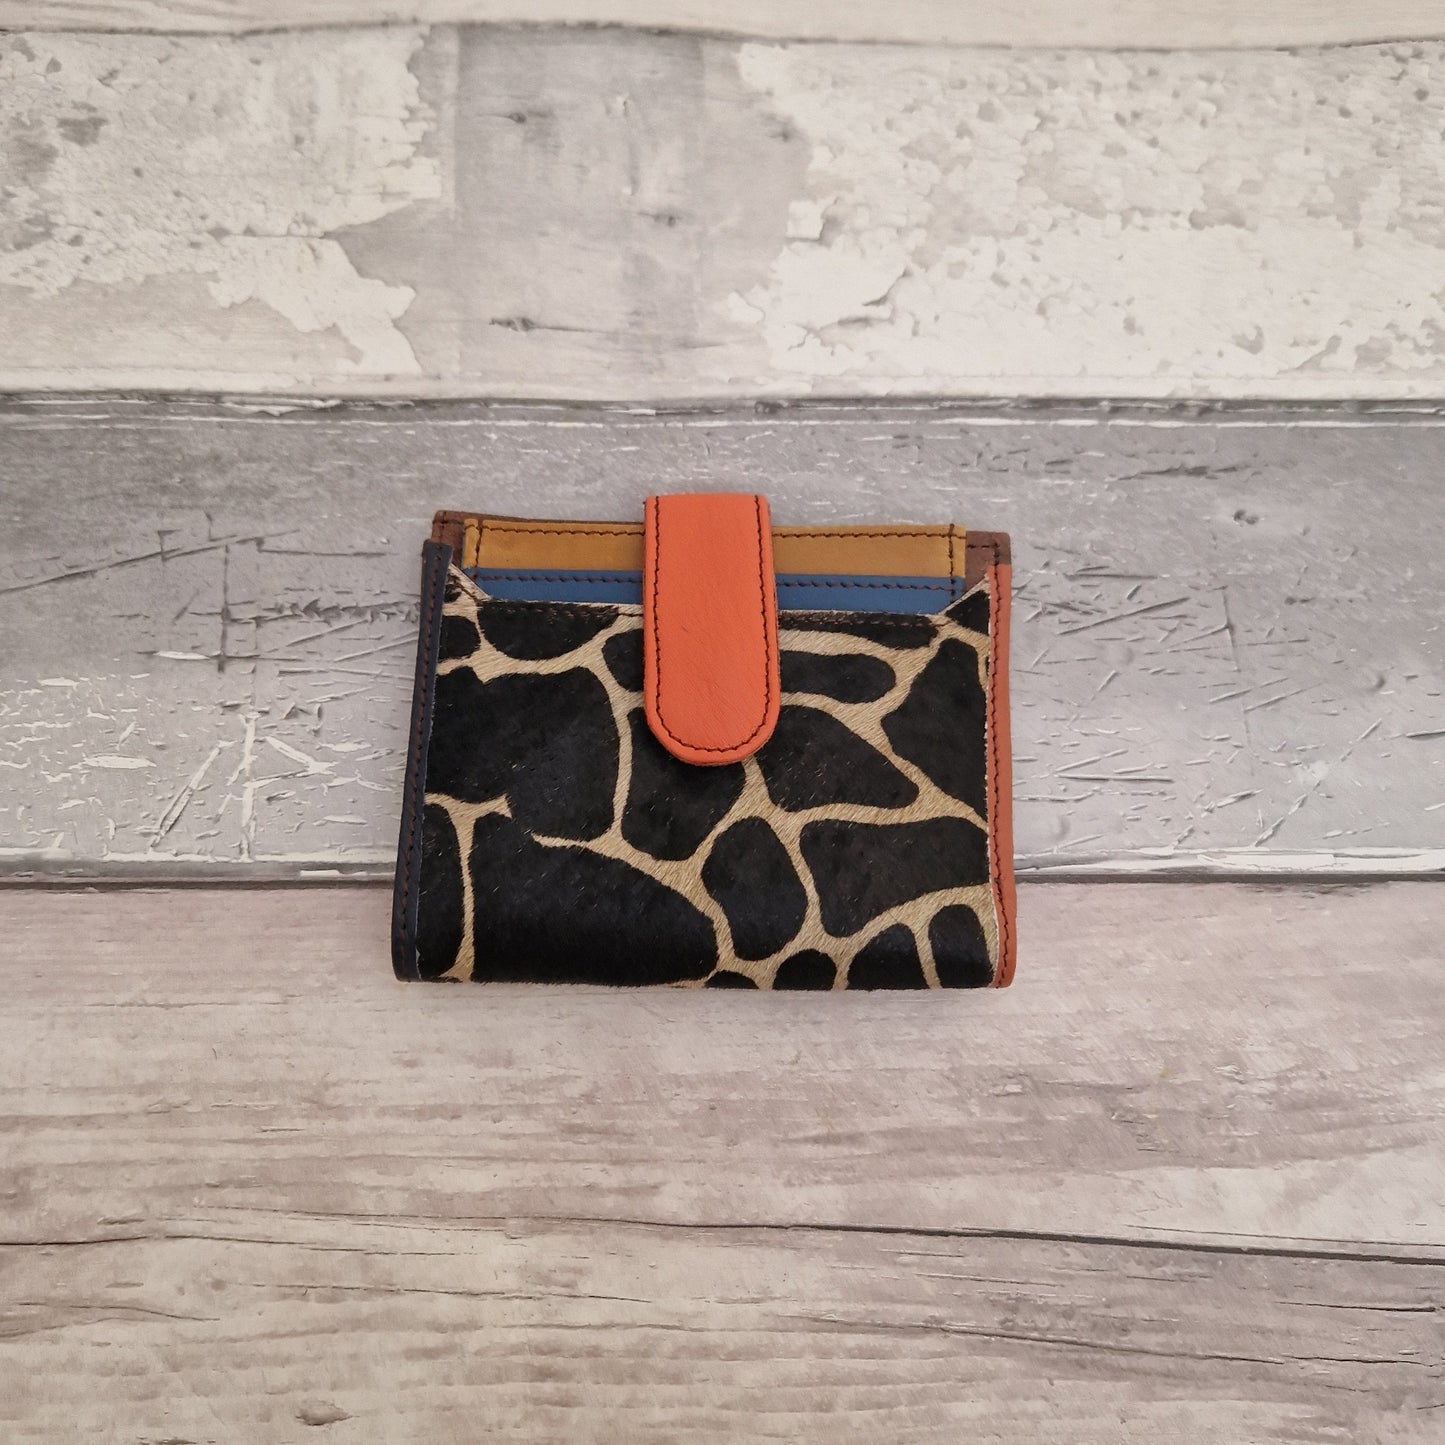 Leather ladies wallet with a textured front panel in giraffe print.